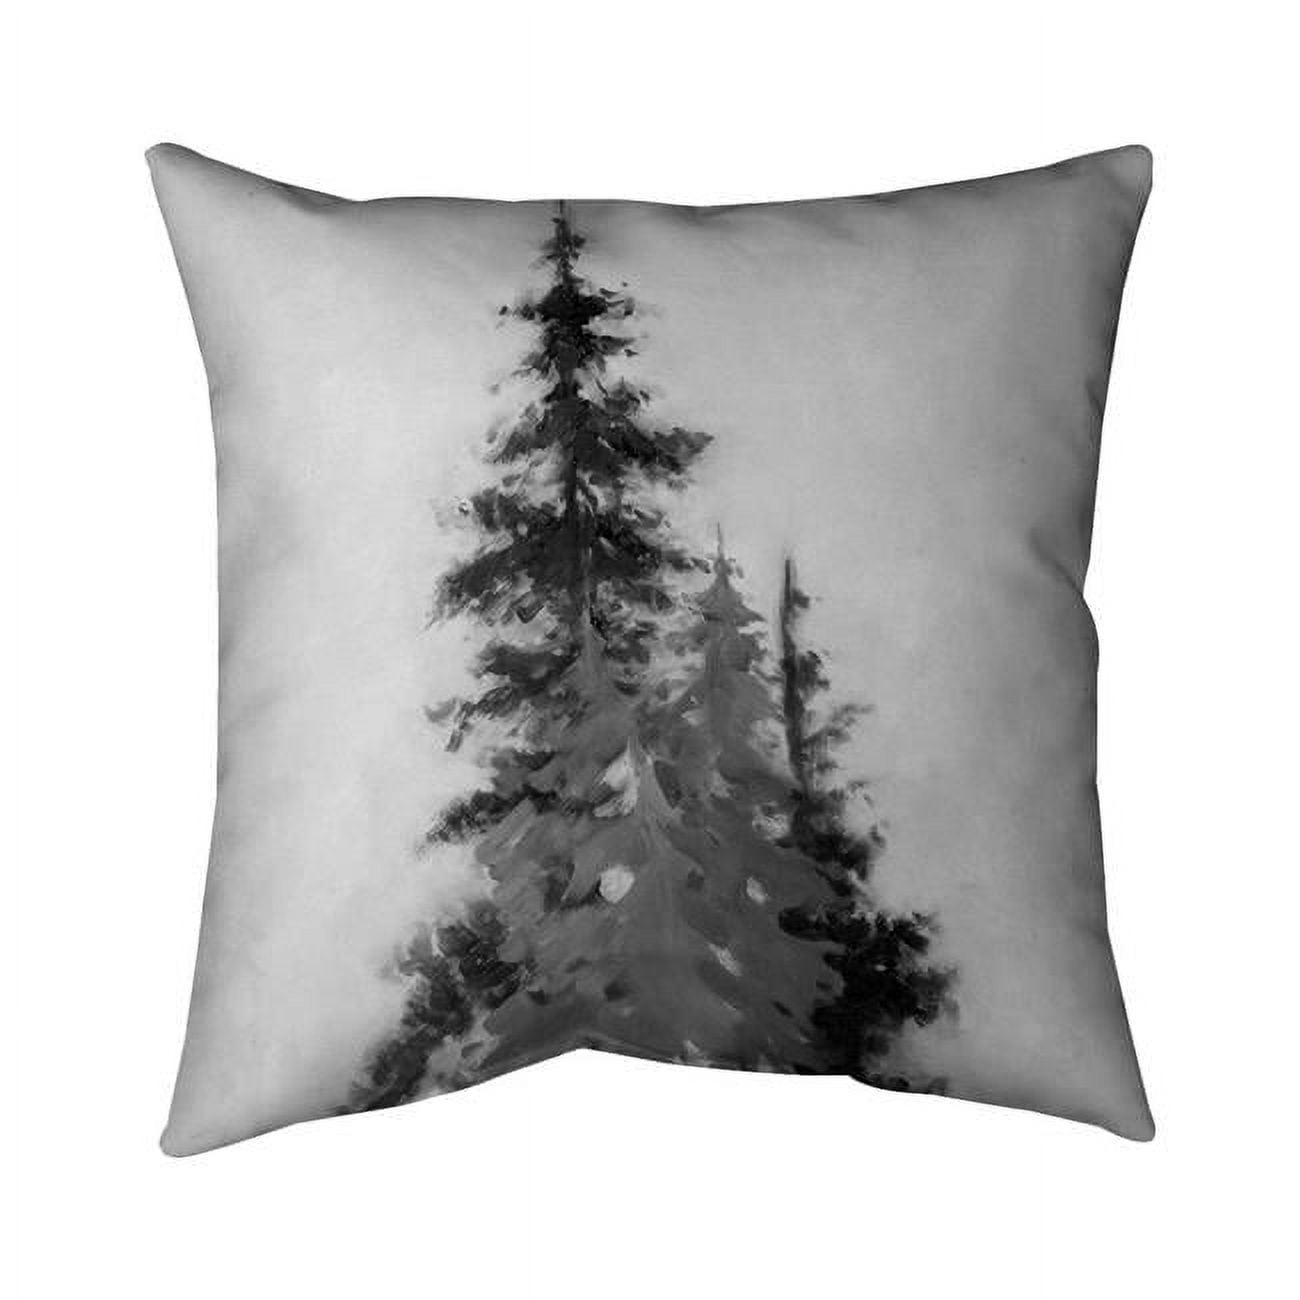 Begin Home Decor 5542-1616-LA65 16 x 16 in. Silhouette of Black & Grey Trees-Double Sided Print Outdoor Pillow Cover